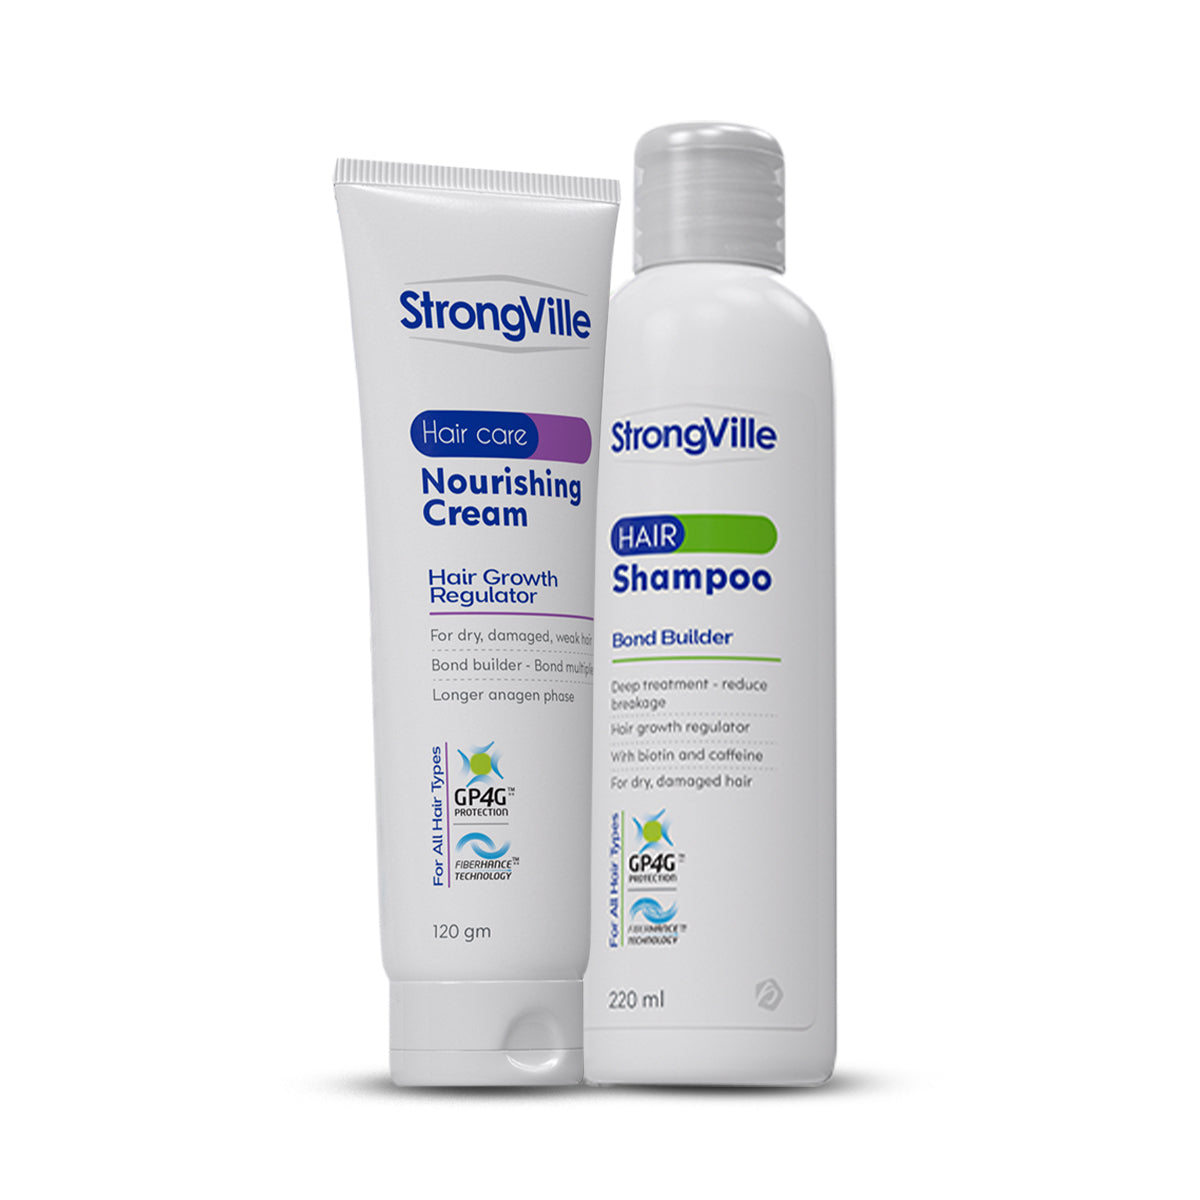 Strongville Shampoo and cream Offer